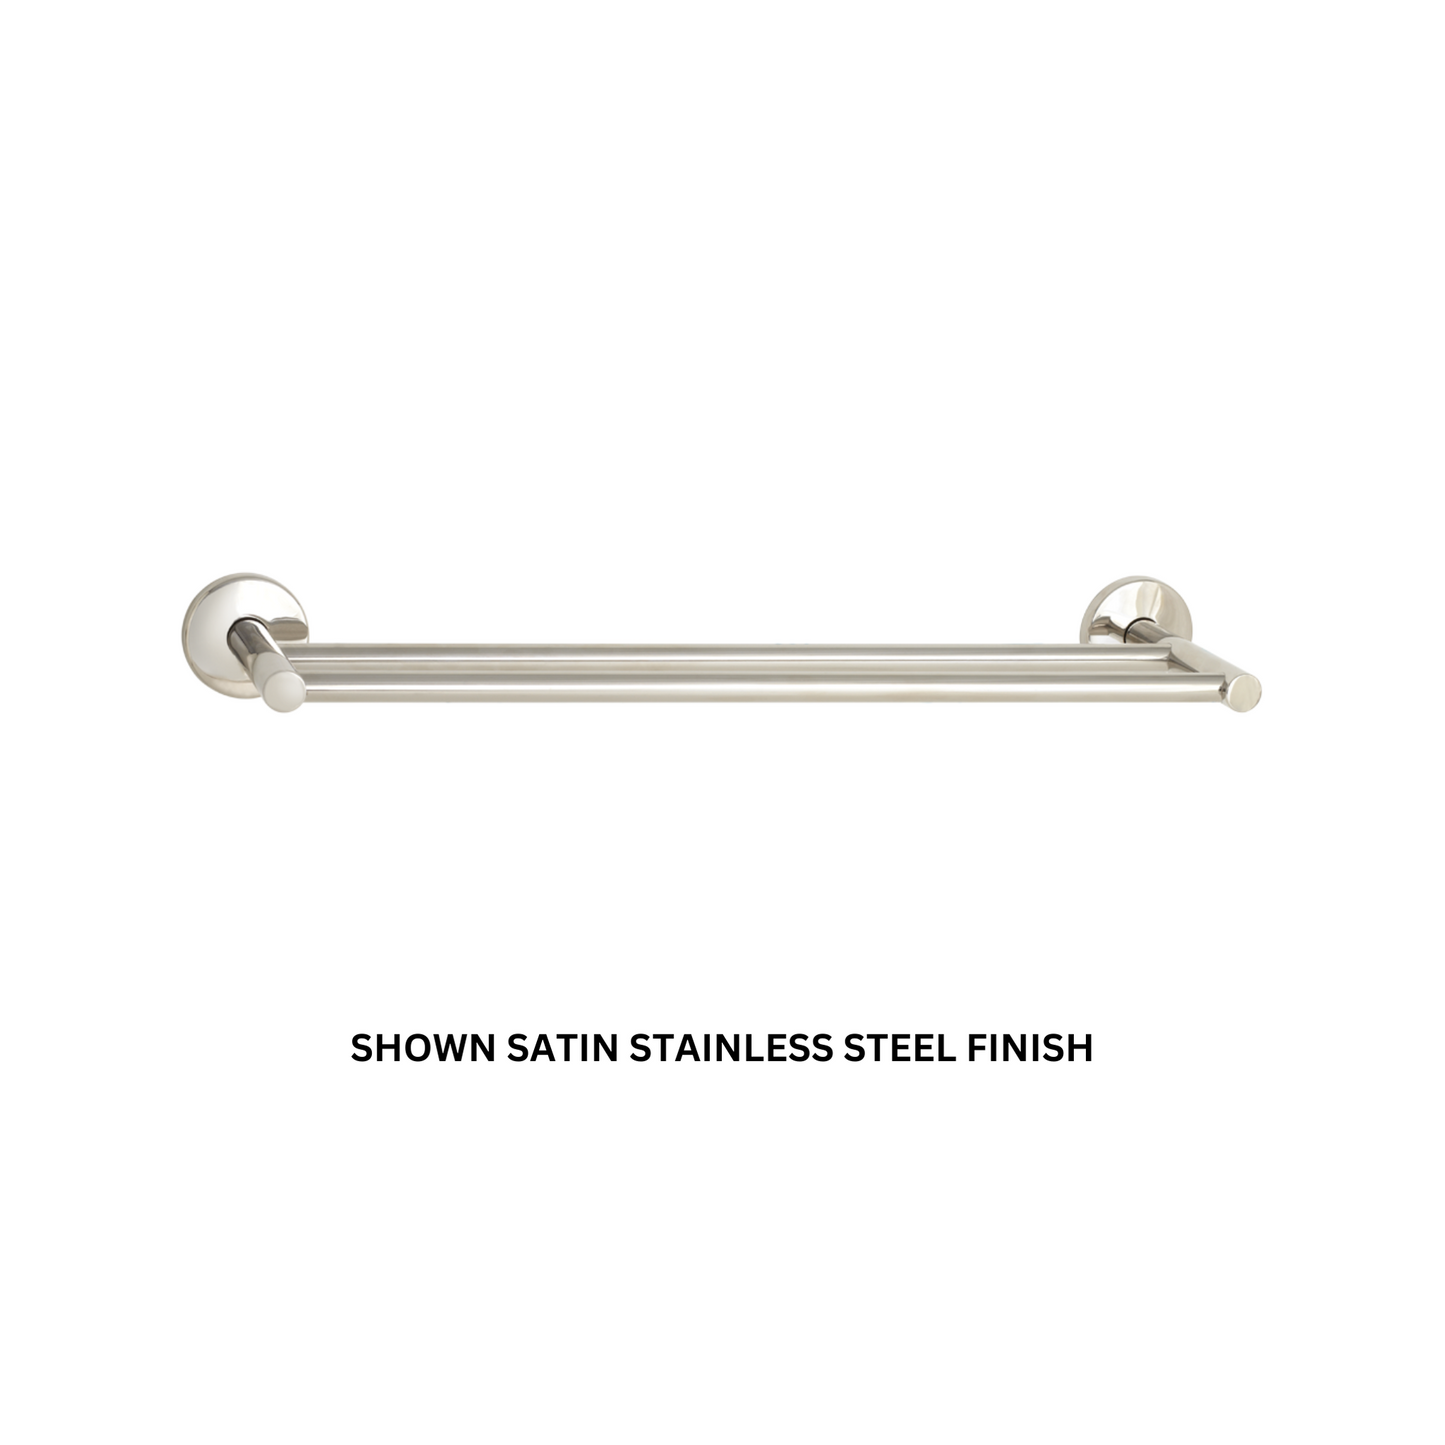 Seachrome Conorado Series 24" Bronze Powder Coat Concealed Mounting Flange Double Towel Bar